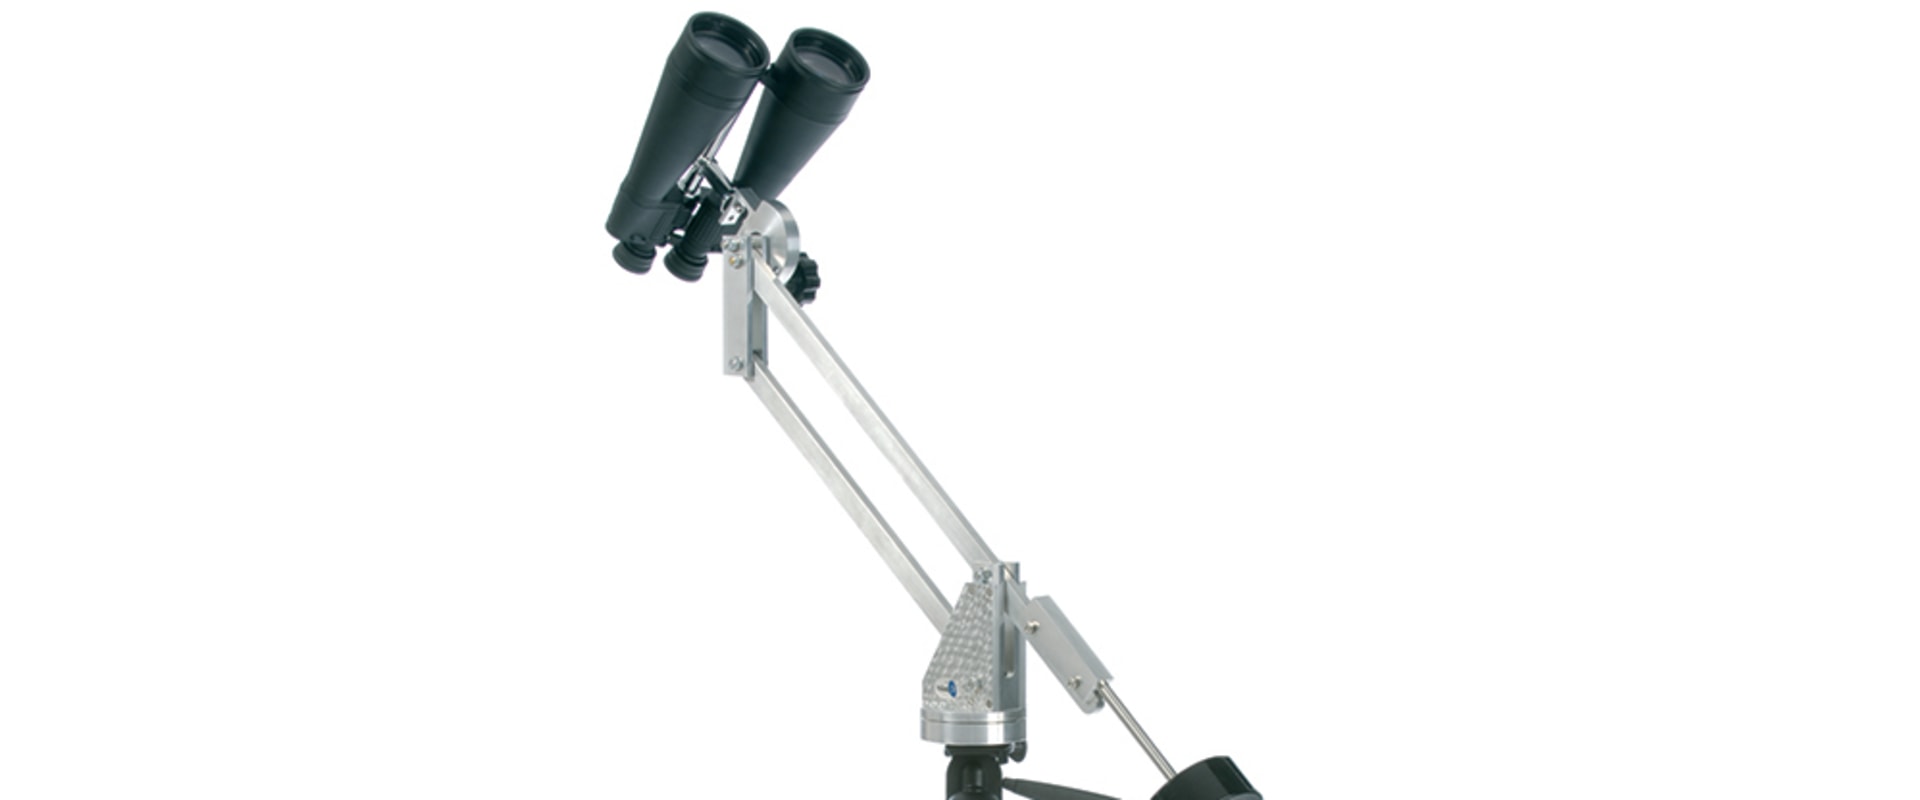 Tripods and Mounts: What You Need to Know